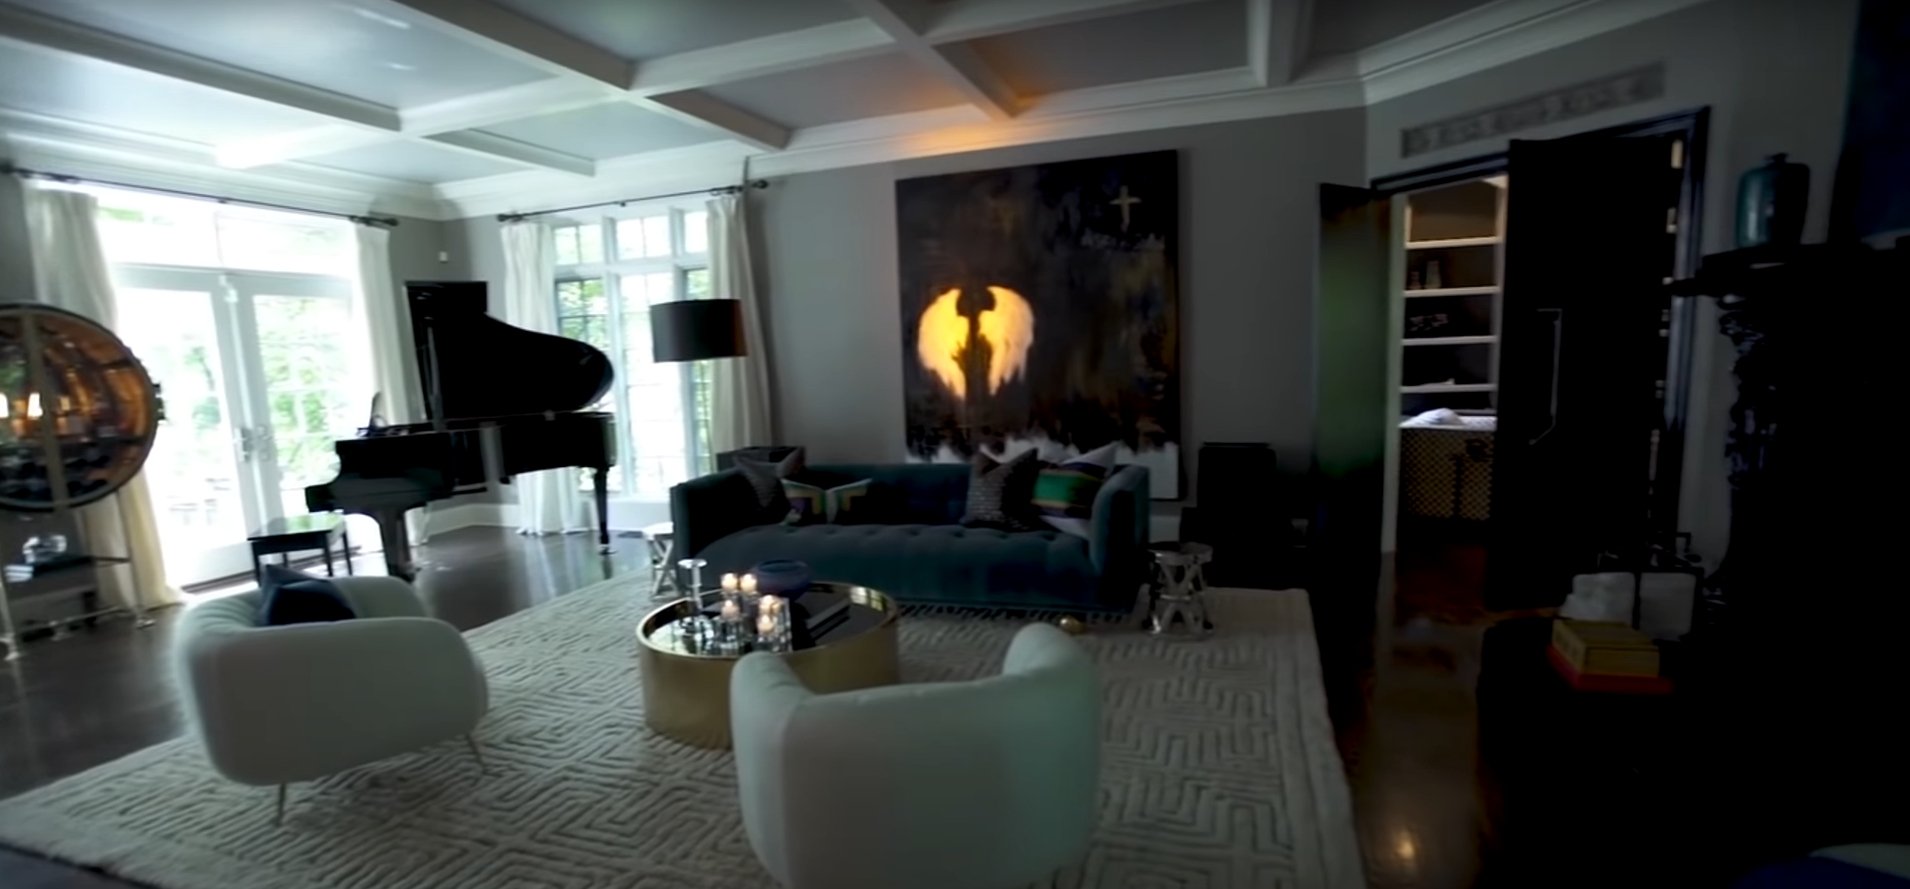 Picture of the interior design of the family room of Wahlberg's and McCarthy's home | Source: YouTube/People